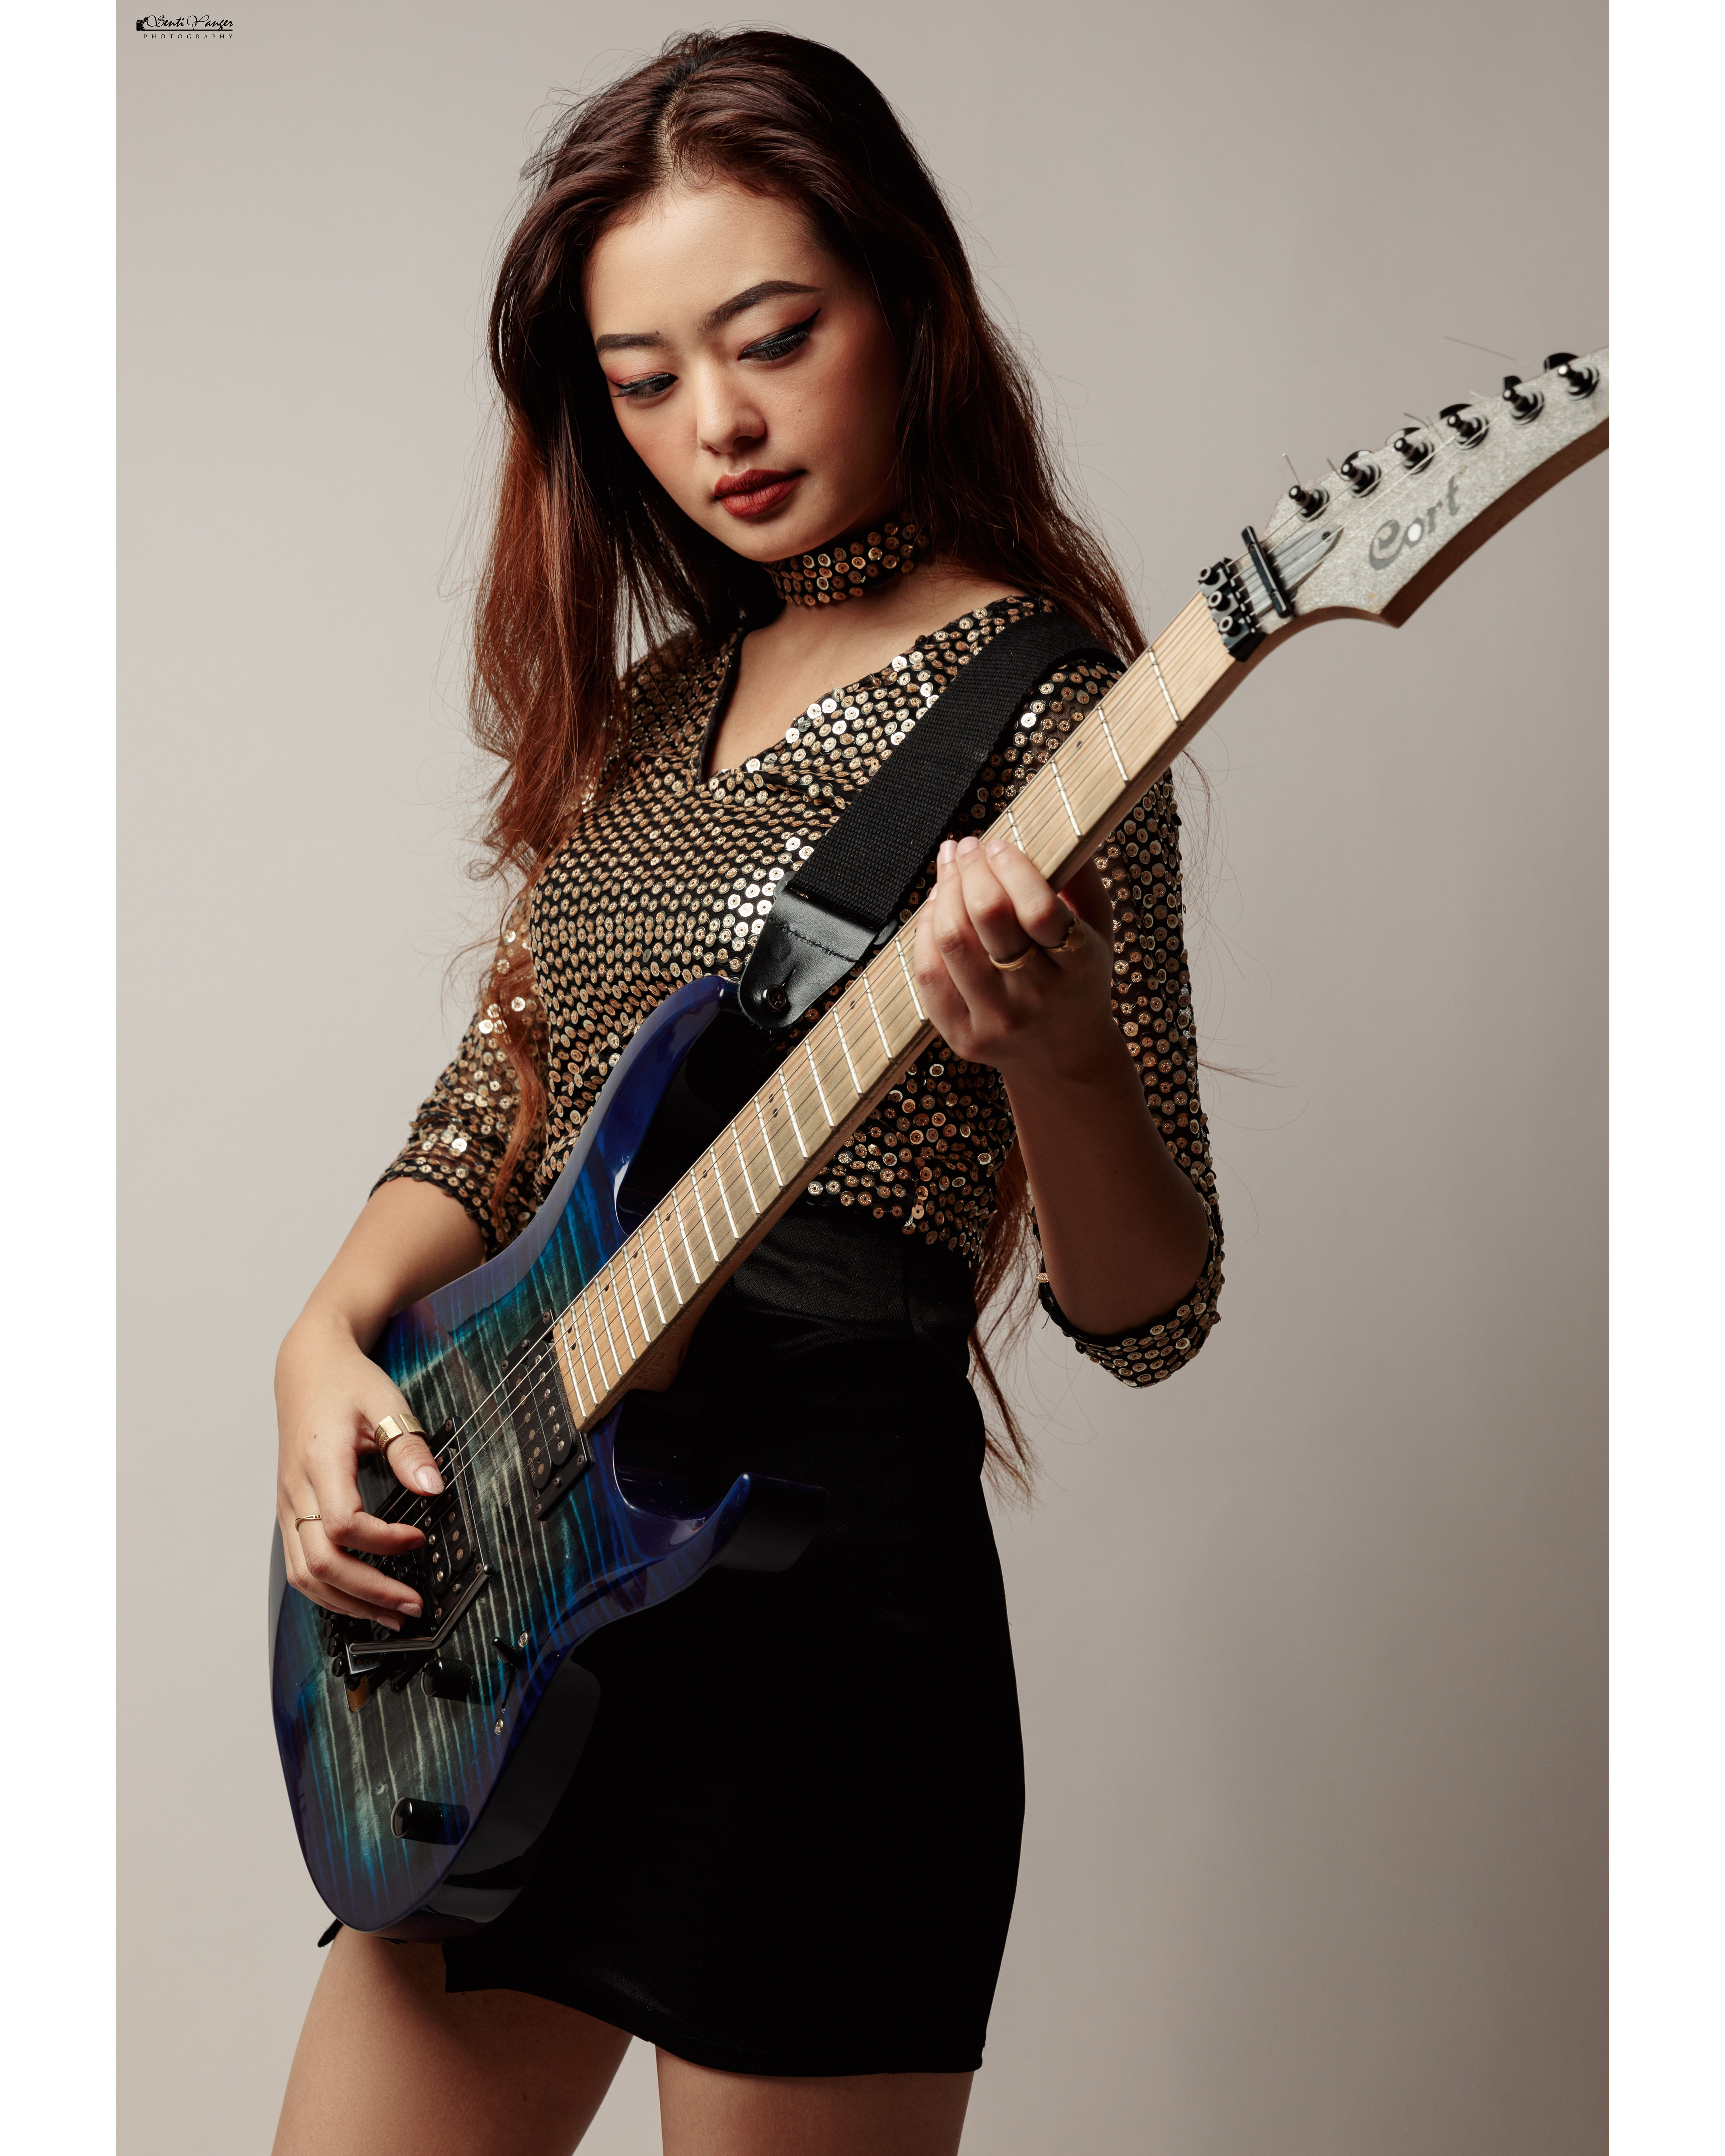 Jamir poses with her electric guitar | Photo by special arrangement